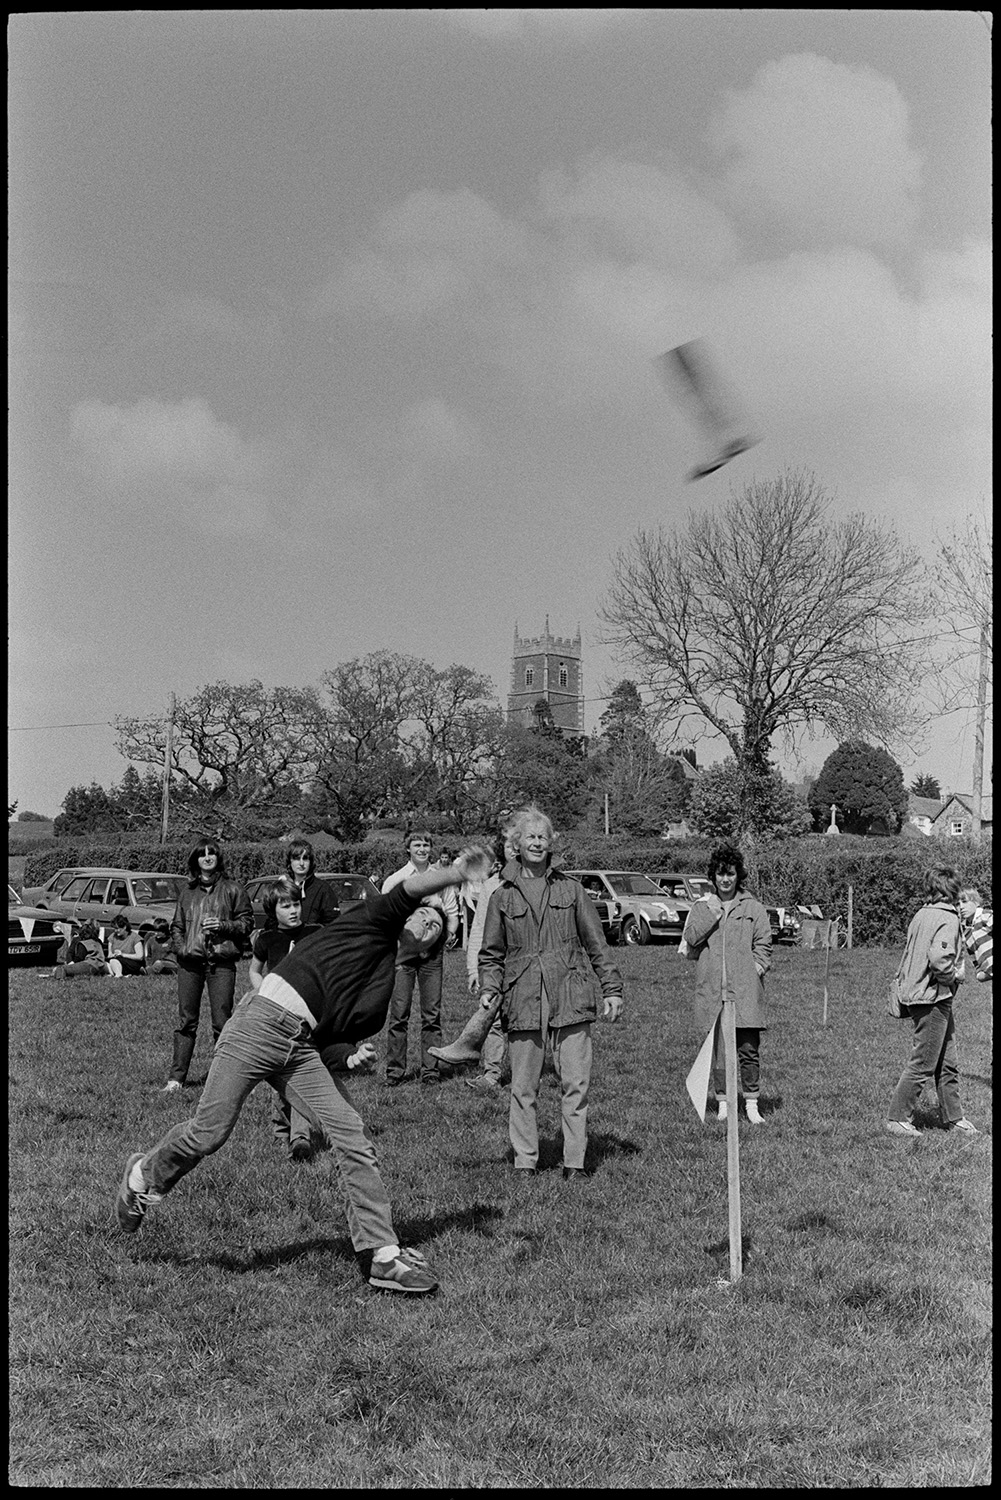 Club Day, sports, sack race, wellie throwing, man filming.
[People watching and taking part in wellie throwing in a field at Iddesleigh Club Day. Parked cars and Iddesleigh Church tower are visible in the background.]